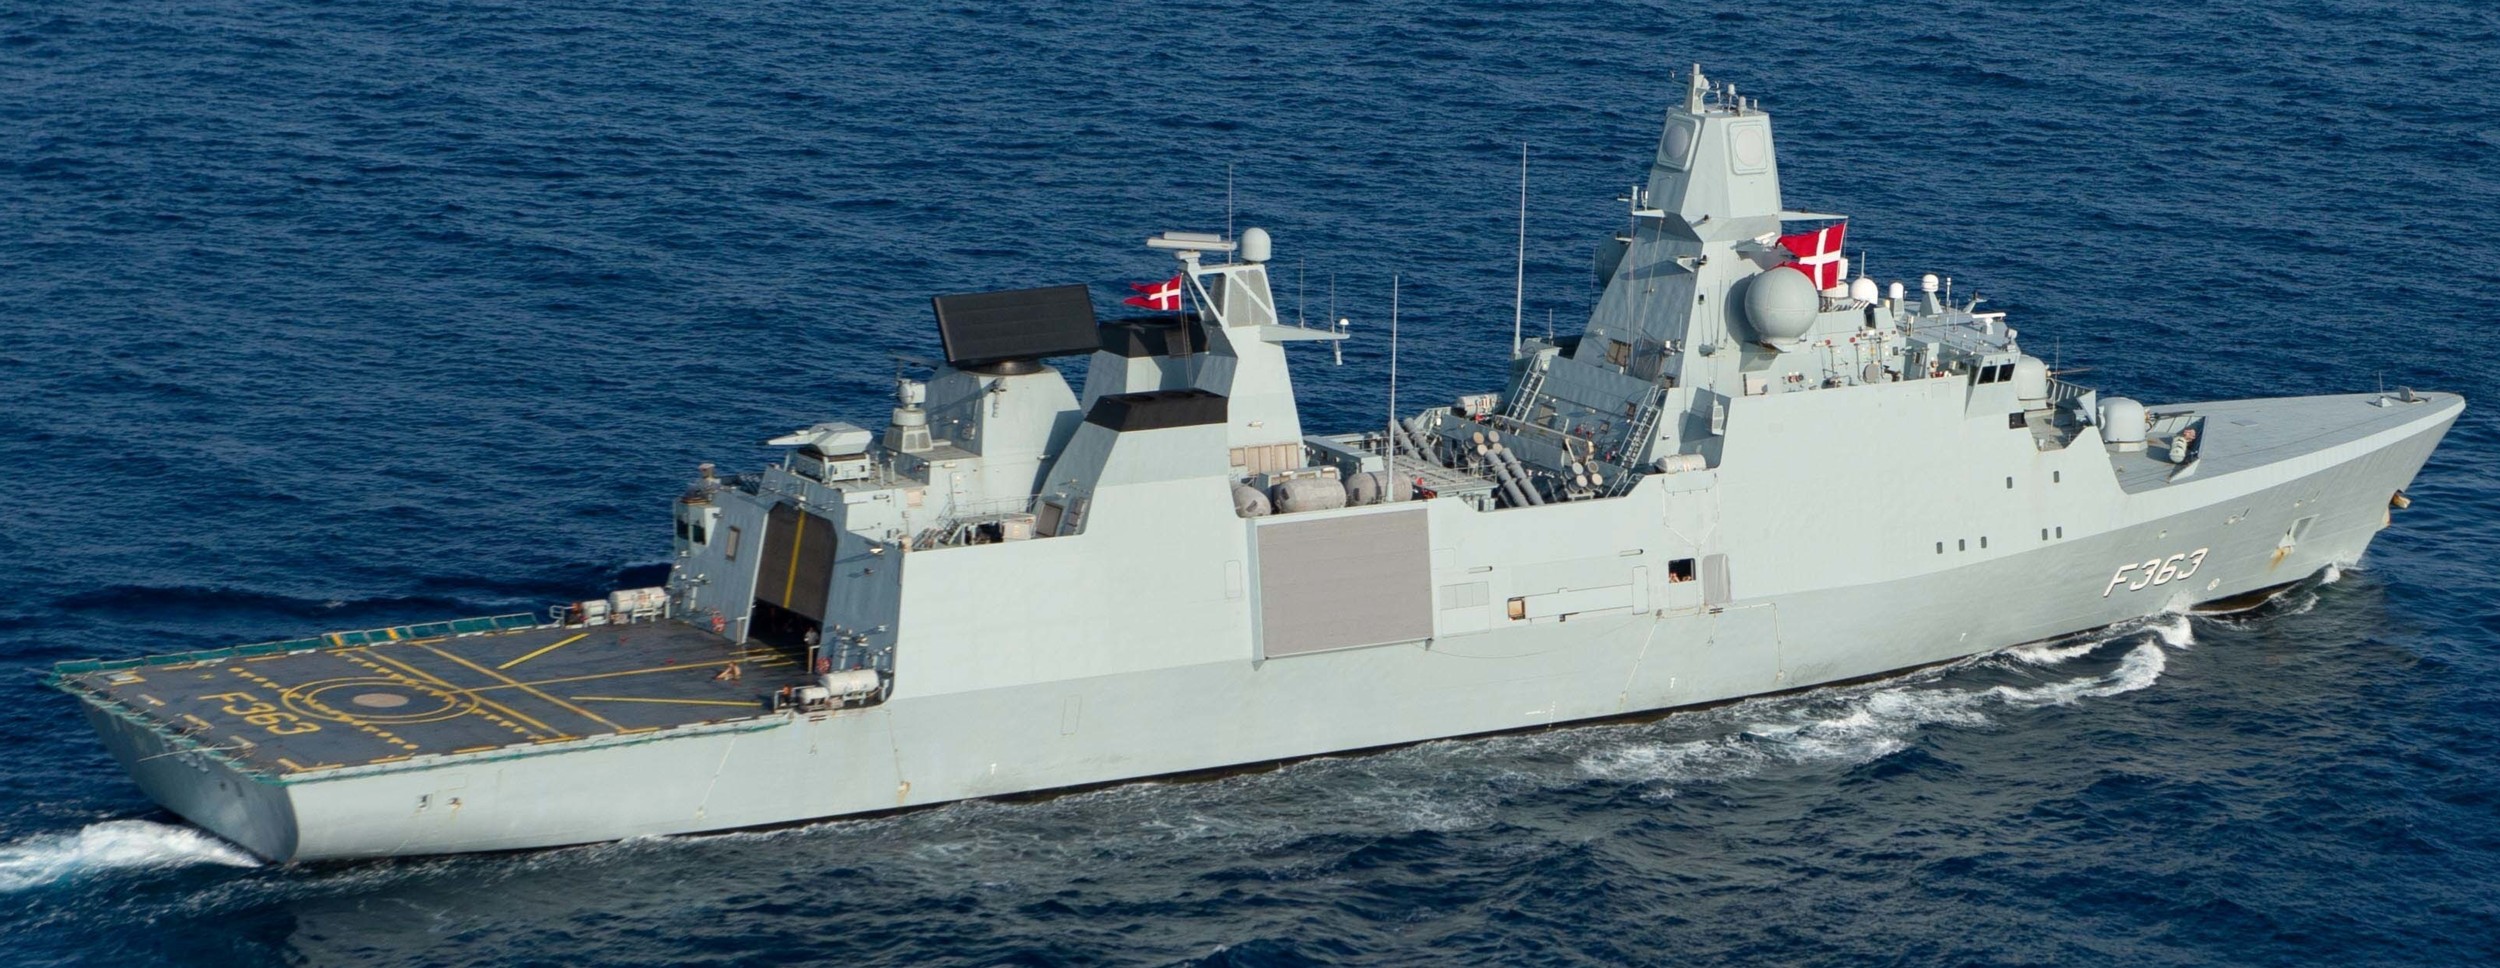 f-363 hdms niels juel iver huitfeldt class guided missile frigate ffg royal danish navy 13